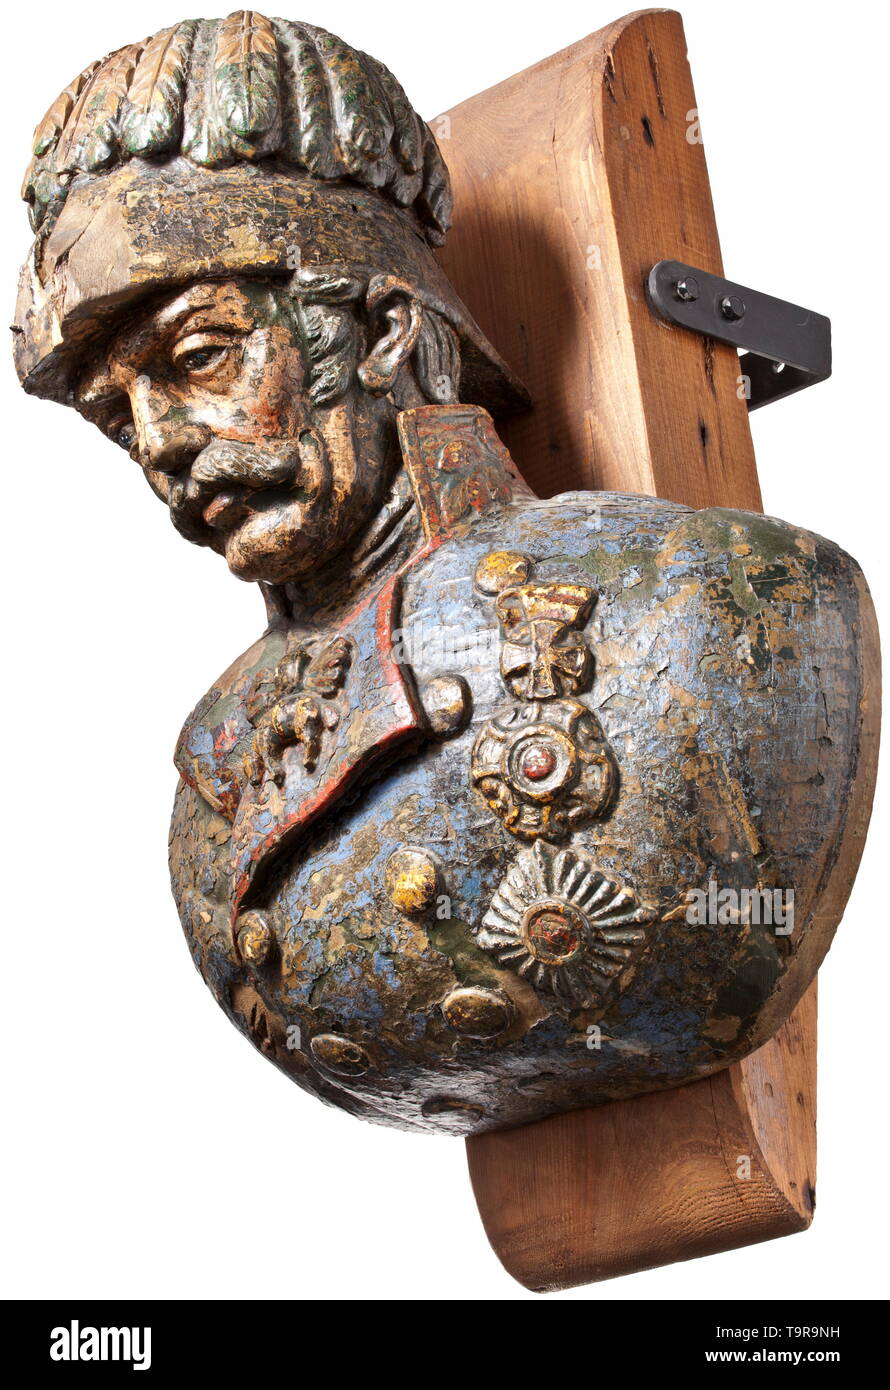 A figurehead SMS 'Radetzky' Colour portrait bust of field marshal Radetzky, carved in wood. Detailed shape, thick paint coat, partially brittle and splintered (the front part of the hat chipped due to manoeuvre damage). The bust is mounted on a wooden beam with wall fastening. Dimensions ca. 60 x 50 x 30 cm The screw frigate 'Radetzky' was equipped with 37 cannons and had a crew of 372 men. Under the command of Admiral von Tegetthoff and with Franz Jeremiasch as captain of the ship, the 'Radetzky' took part in the naval battle against the Danes n, Additional-Rights-Clearance-Info-Not-Available Stock Photo